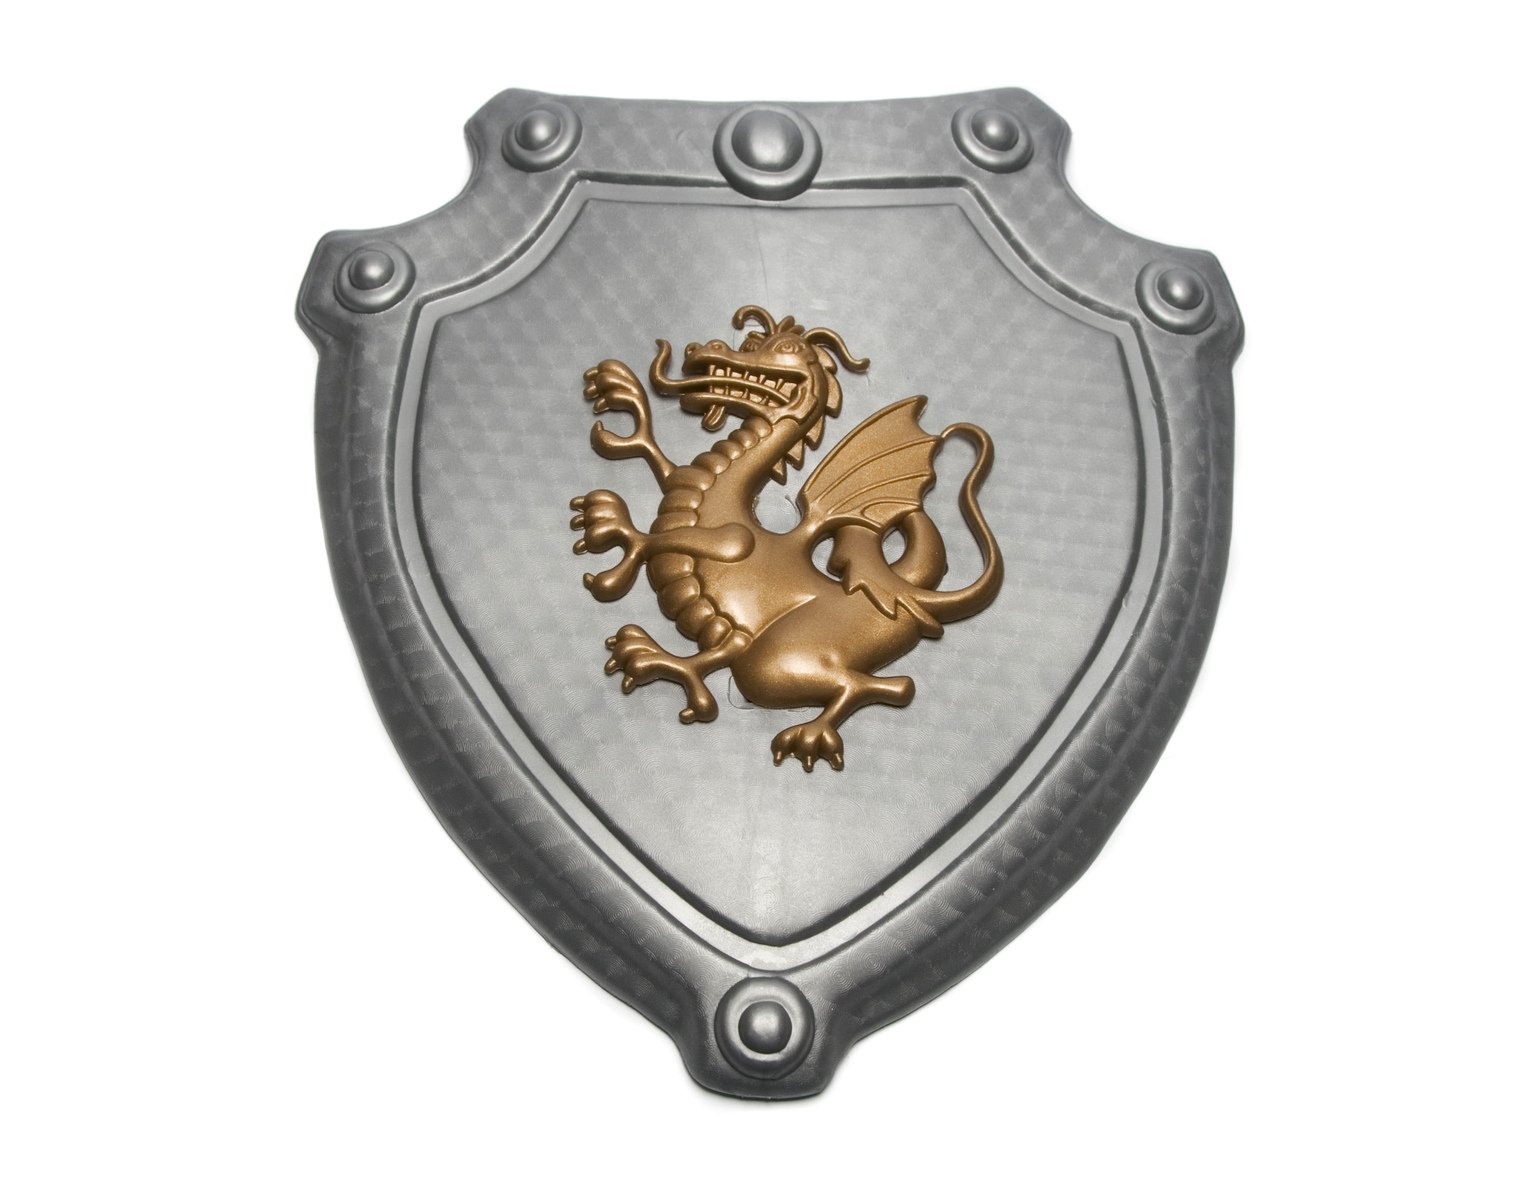 the golden dragon on a shield is displayed in this image